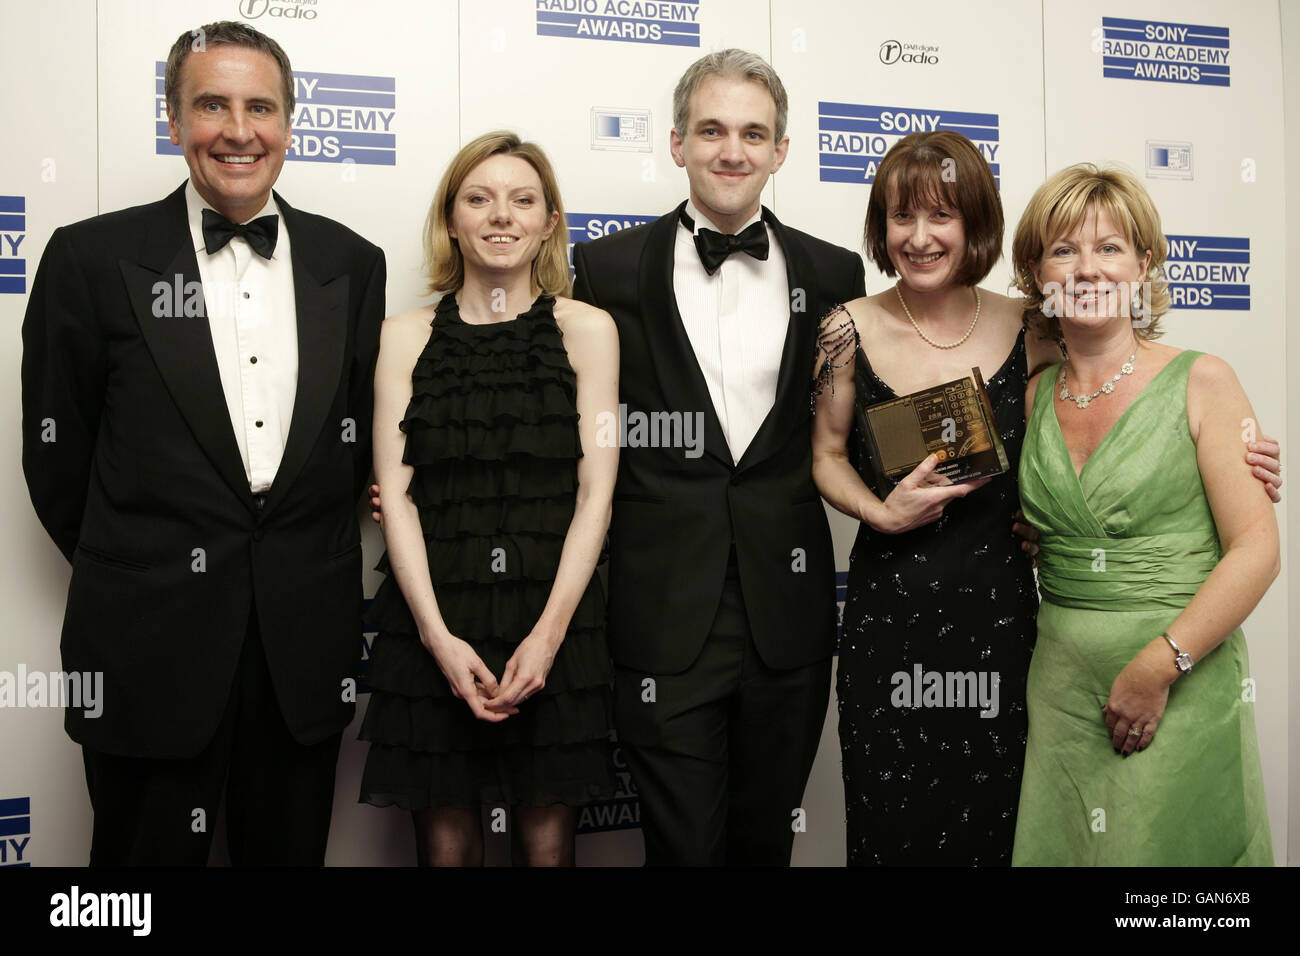 The Breaking News Award is presented to BBC Radio Ulster by Dermot Murnaghan (left) during the Sony Radio Academy Awards at the Grosvenor House Hotel in central London. Stock Photo